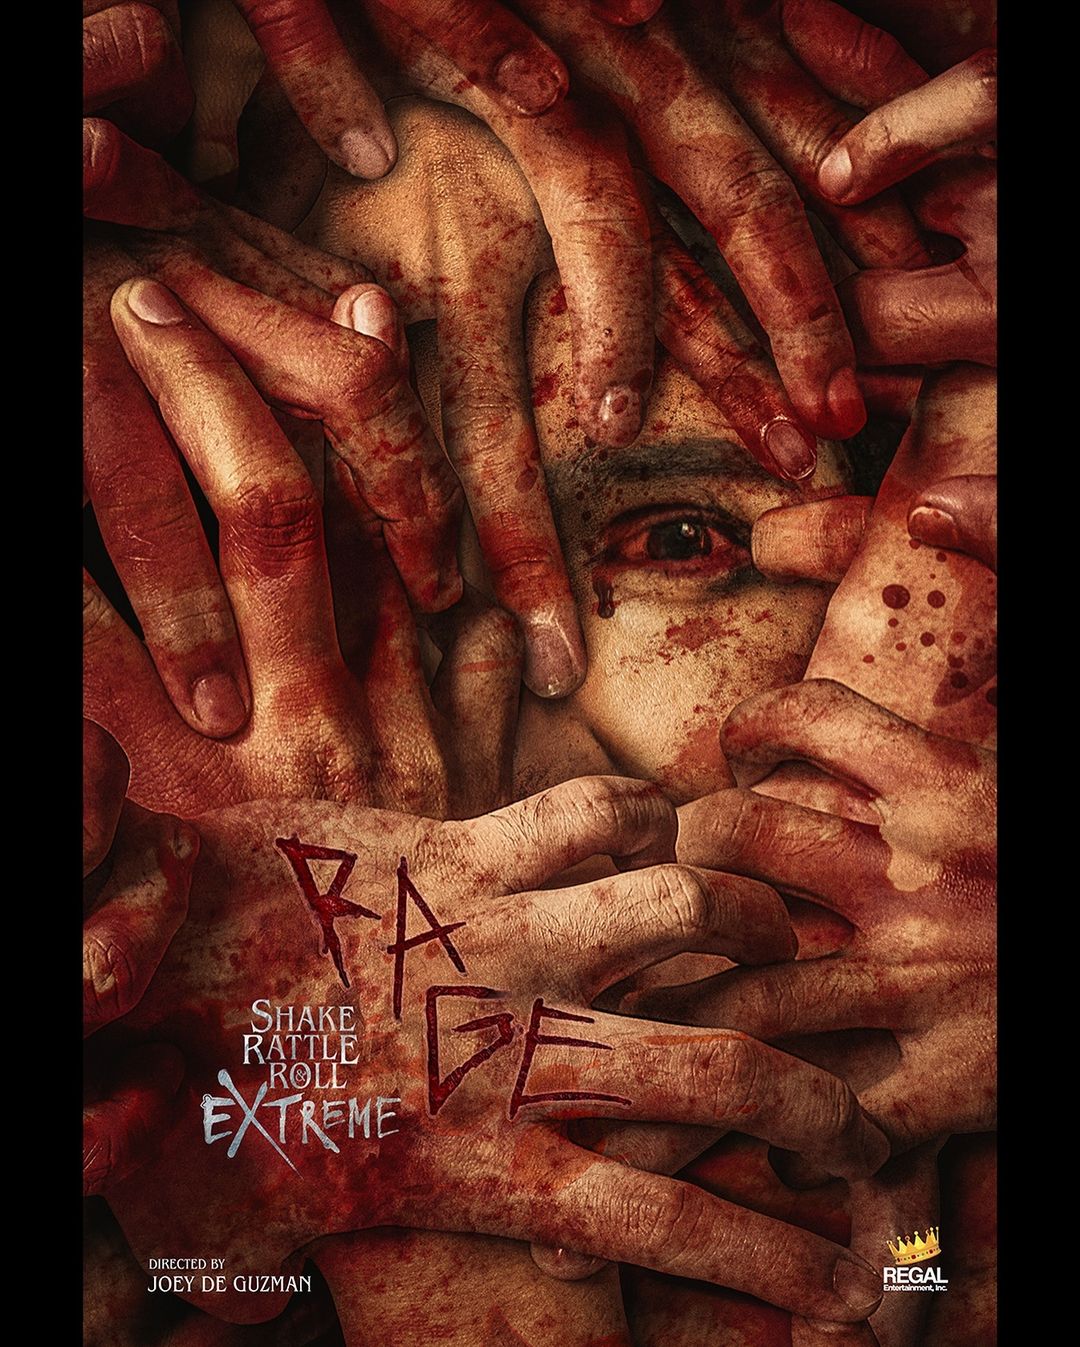 SHAKE RATTLE & ROLL EXTREME